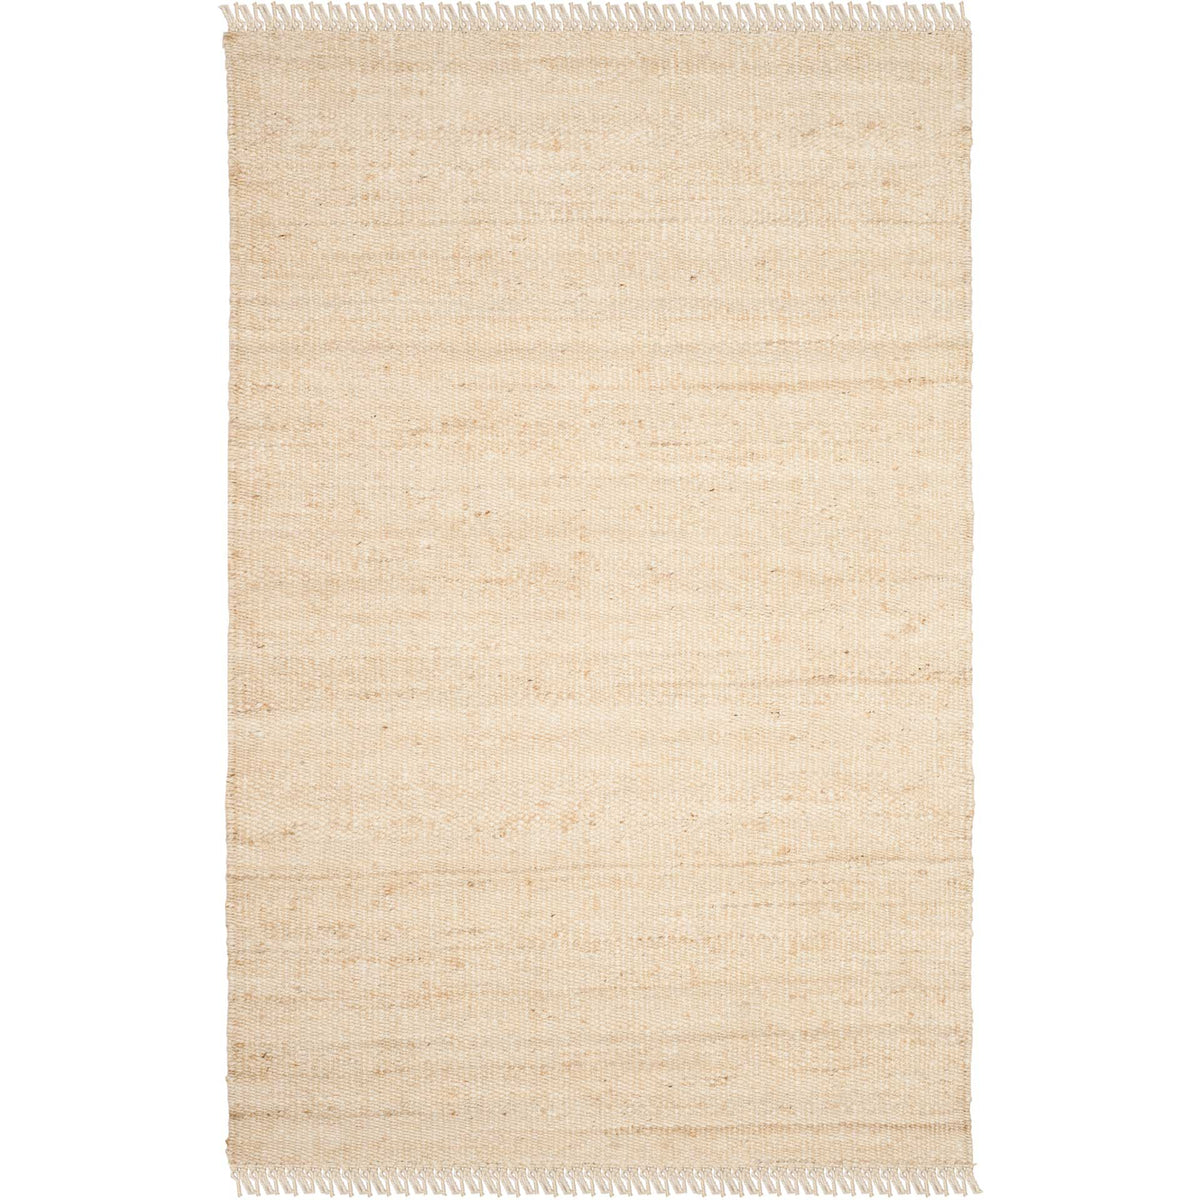 Orly Wool Blend Textured Ivory Area Rug 8'x10' + Reviews